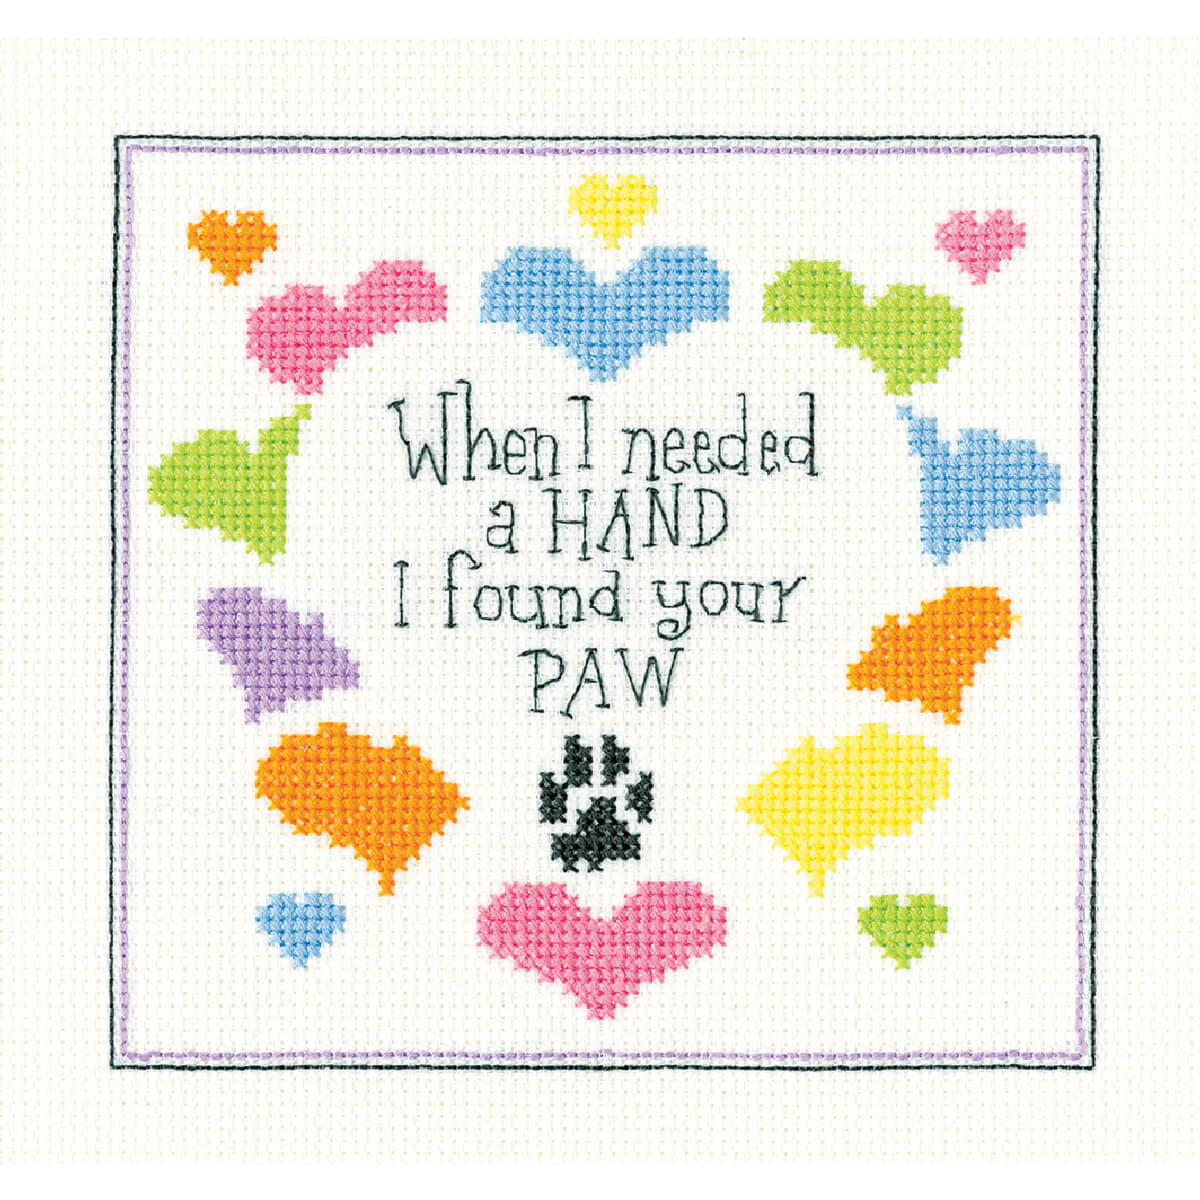 Heritage counted cross stitch kit Aida "I Found Your...